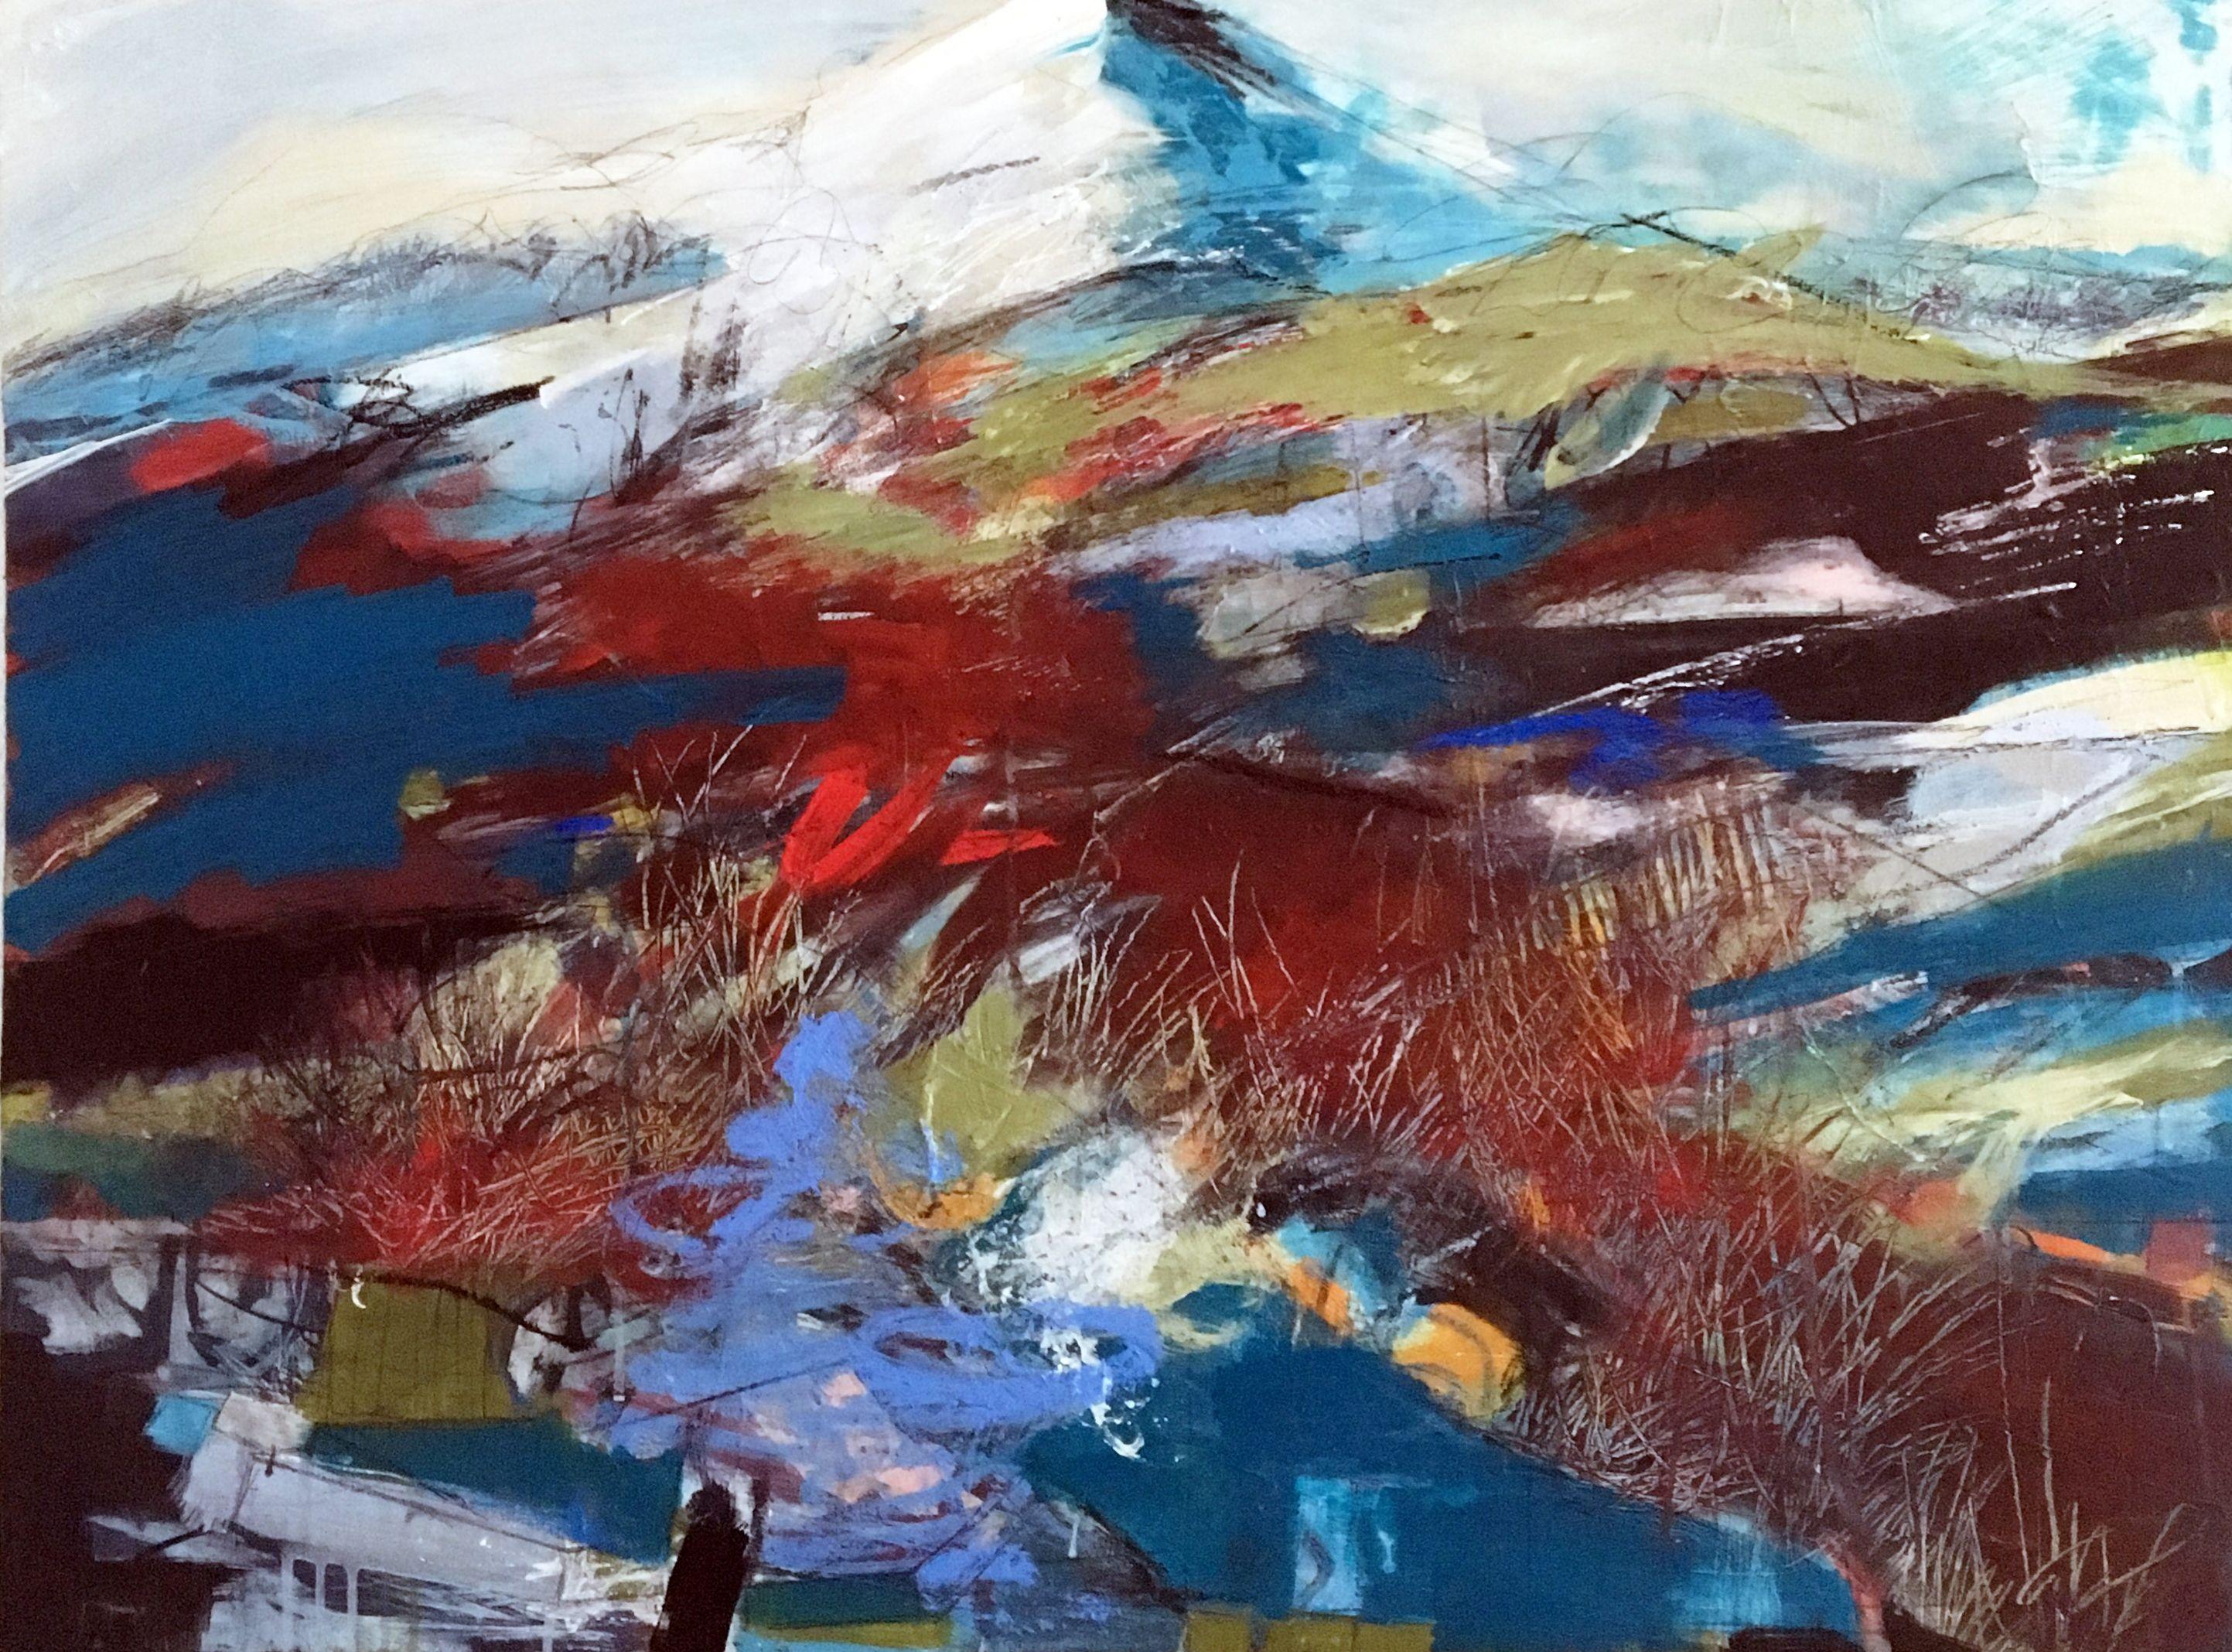 Snow capped mountain, Mixed Media on Canvas - Mixed Media Art by Theresa Vandenberg Donche